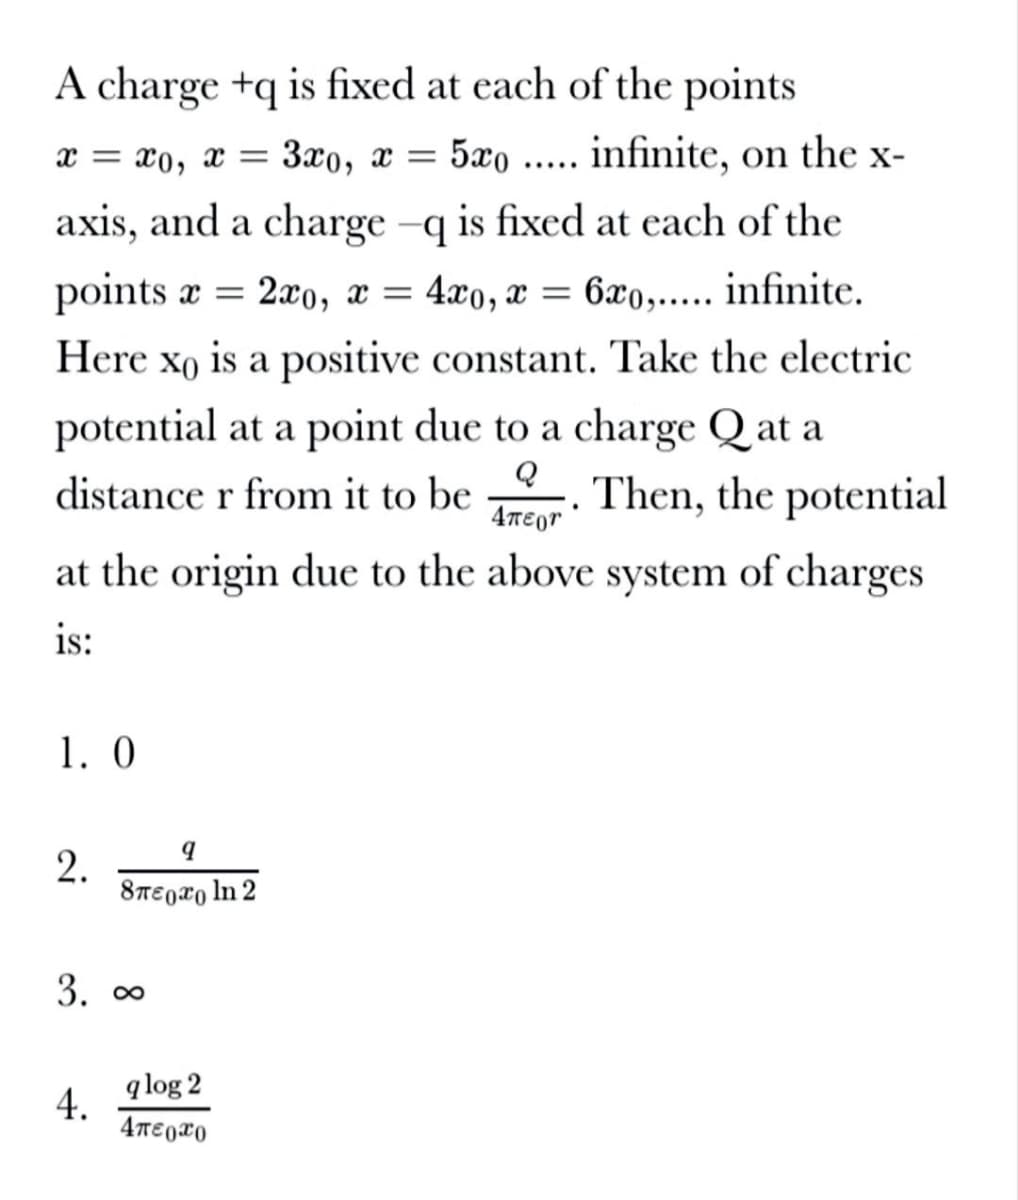 A charge +q is fixed at each of the points
x = x0, x =
3x0, x =
5xo
infinite, on the x-
.....
axis, and a charge -q is fixed at each of the
points a =
2xo, x = 4x0, x = 6x0,..... infinite.
Here xo is a positive constant. Take the electric
potential at a point due to a charge Q at a
distance r from it to be . Then, the potential
4TEgr
at the origin due to the above system of charges
is:
1. 0
8TE0ro ln 2
3. 00
q log 2
4.
2.
